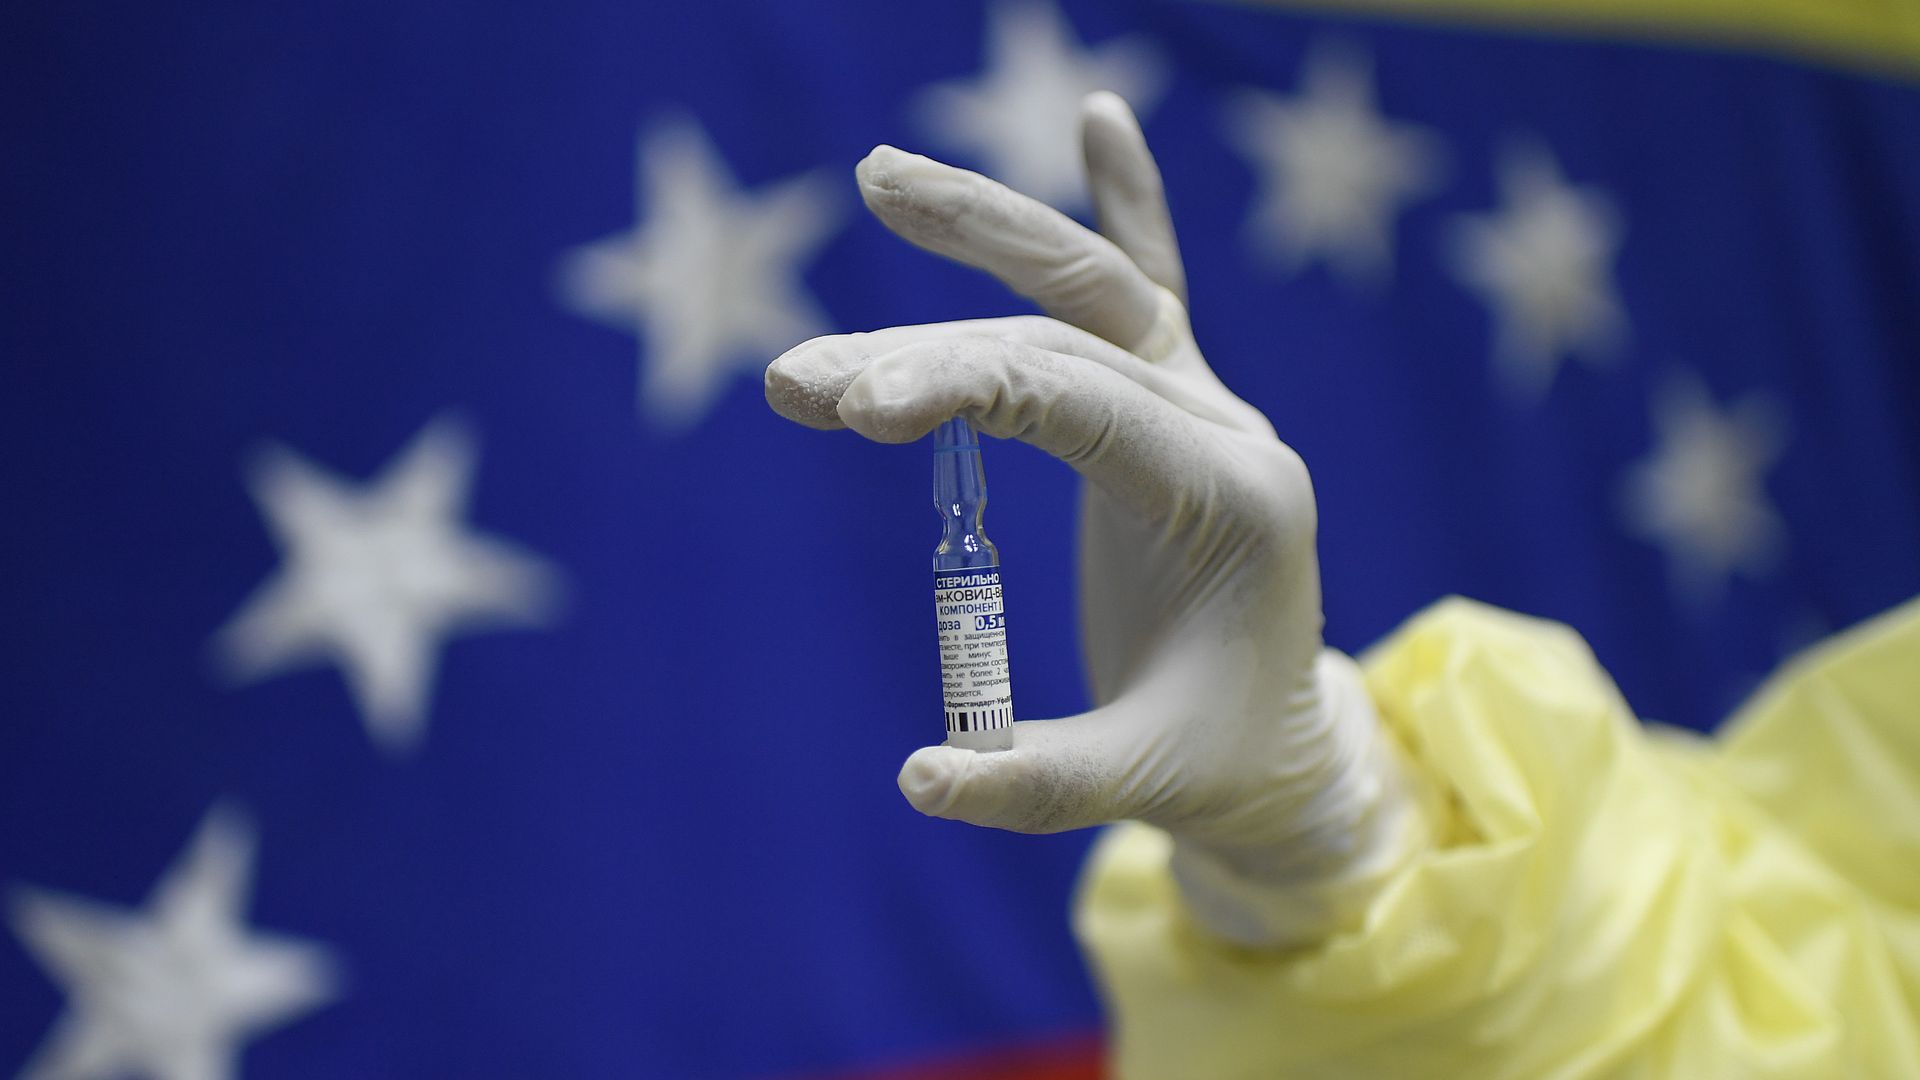 Picture of Russian vaccine vial in front of a Venezuelan flag